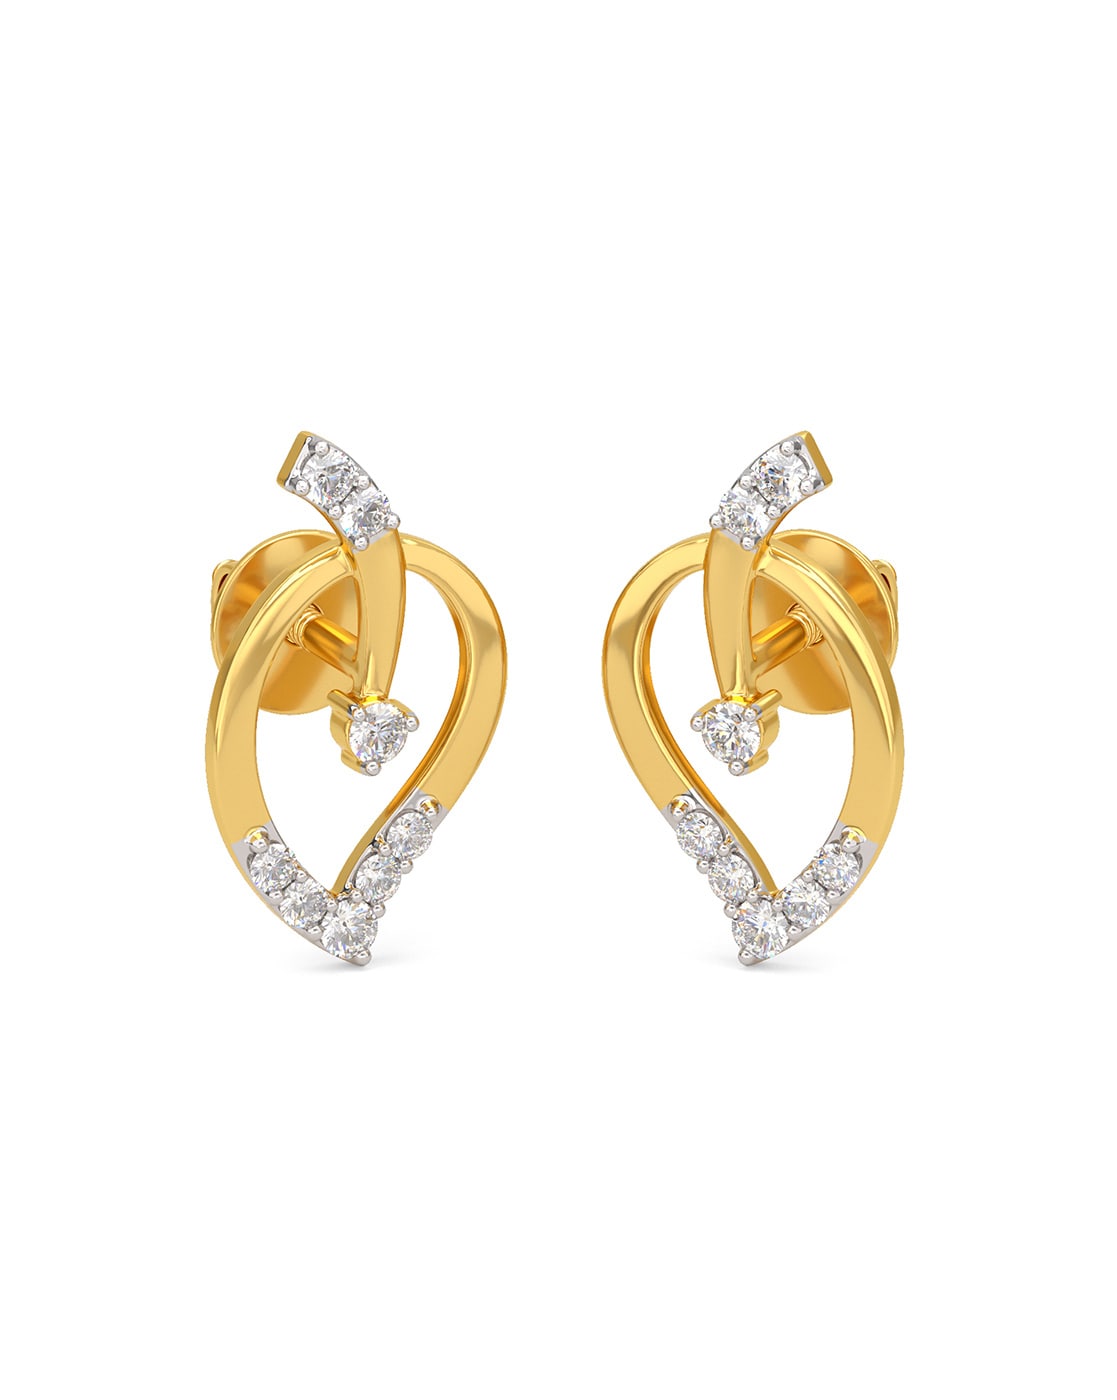 Details more than 253 gold earrings under 8000 best